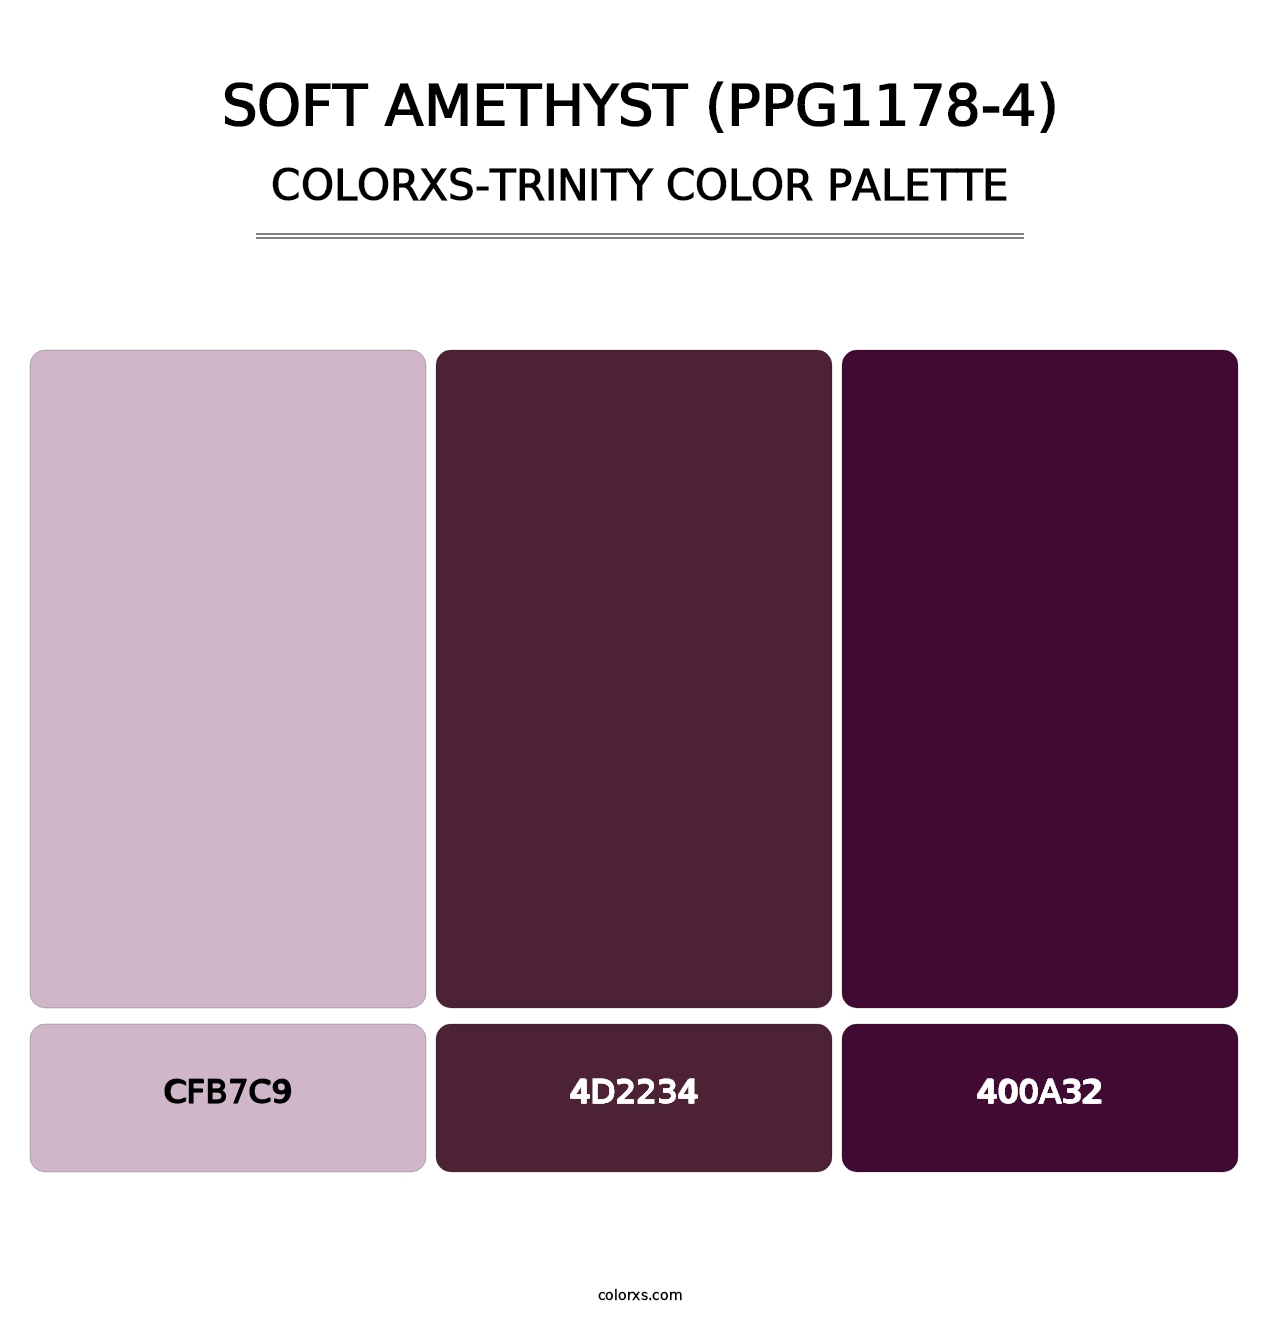 Soft Amethyst (PPG1178-4) - Colorxs Trinity Palette